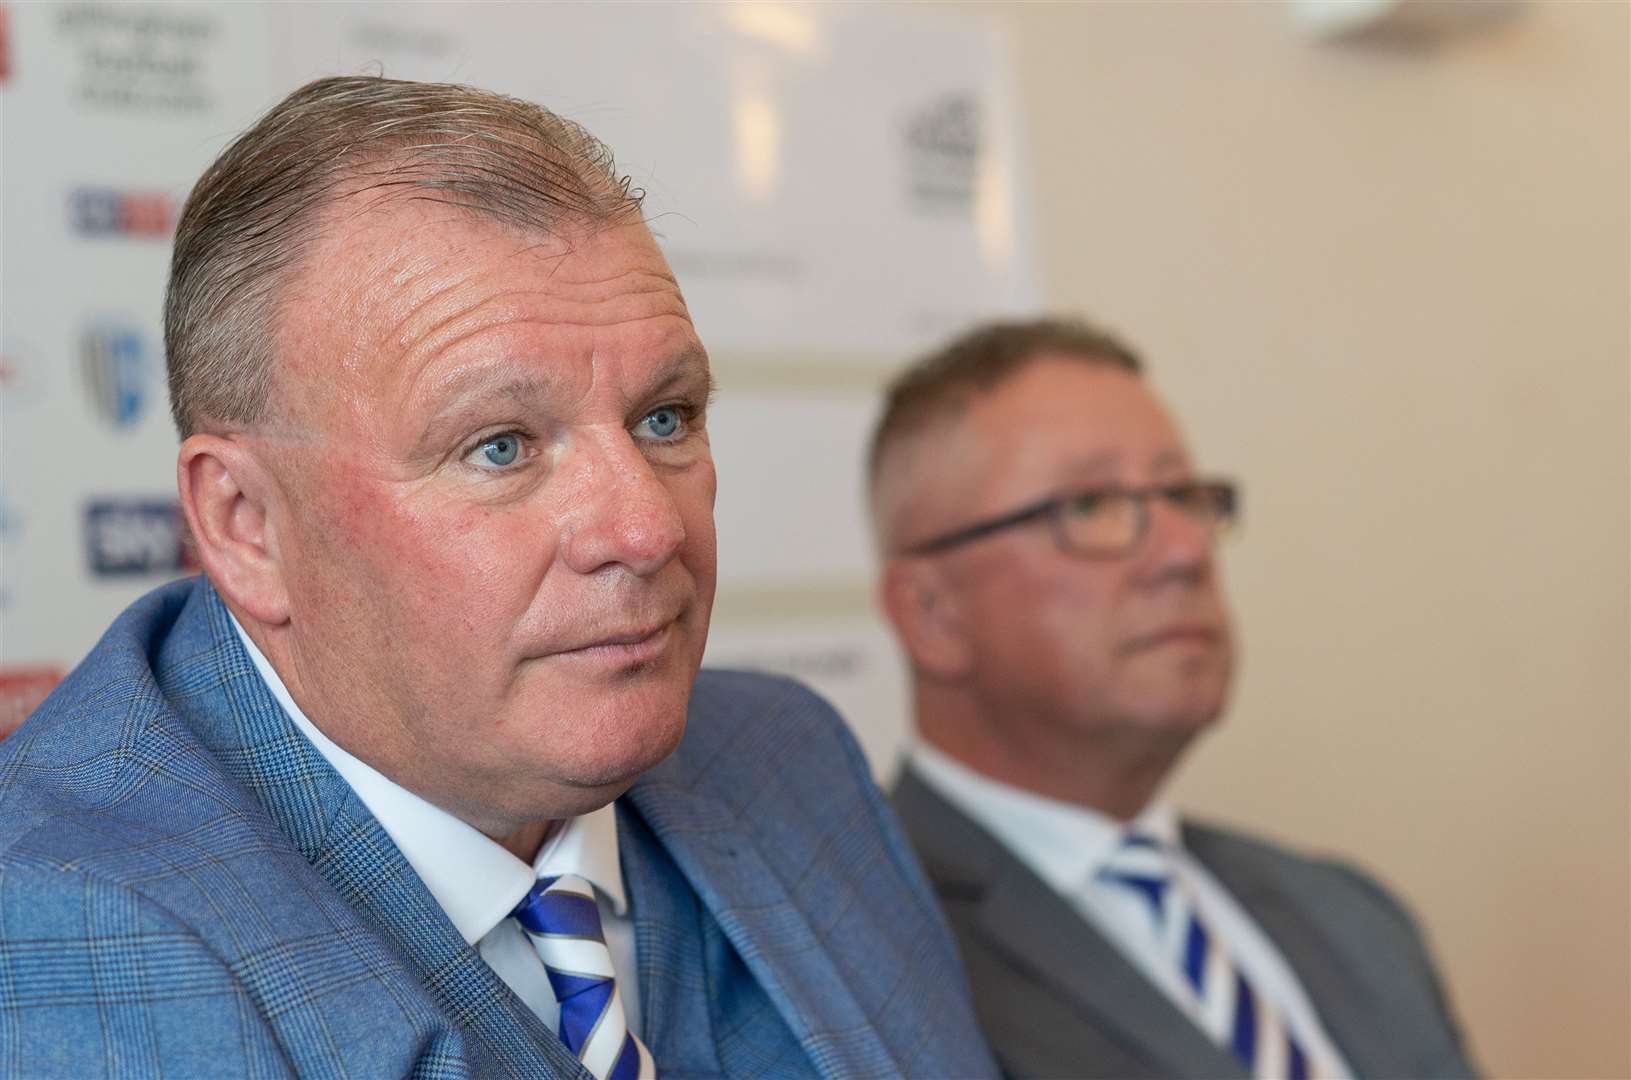 Steve Evans was unveiled in May 2019 as the Gills' new boss...but Paul Scally sacked him this season and doesn't speak highly of him now